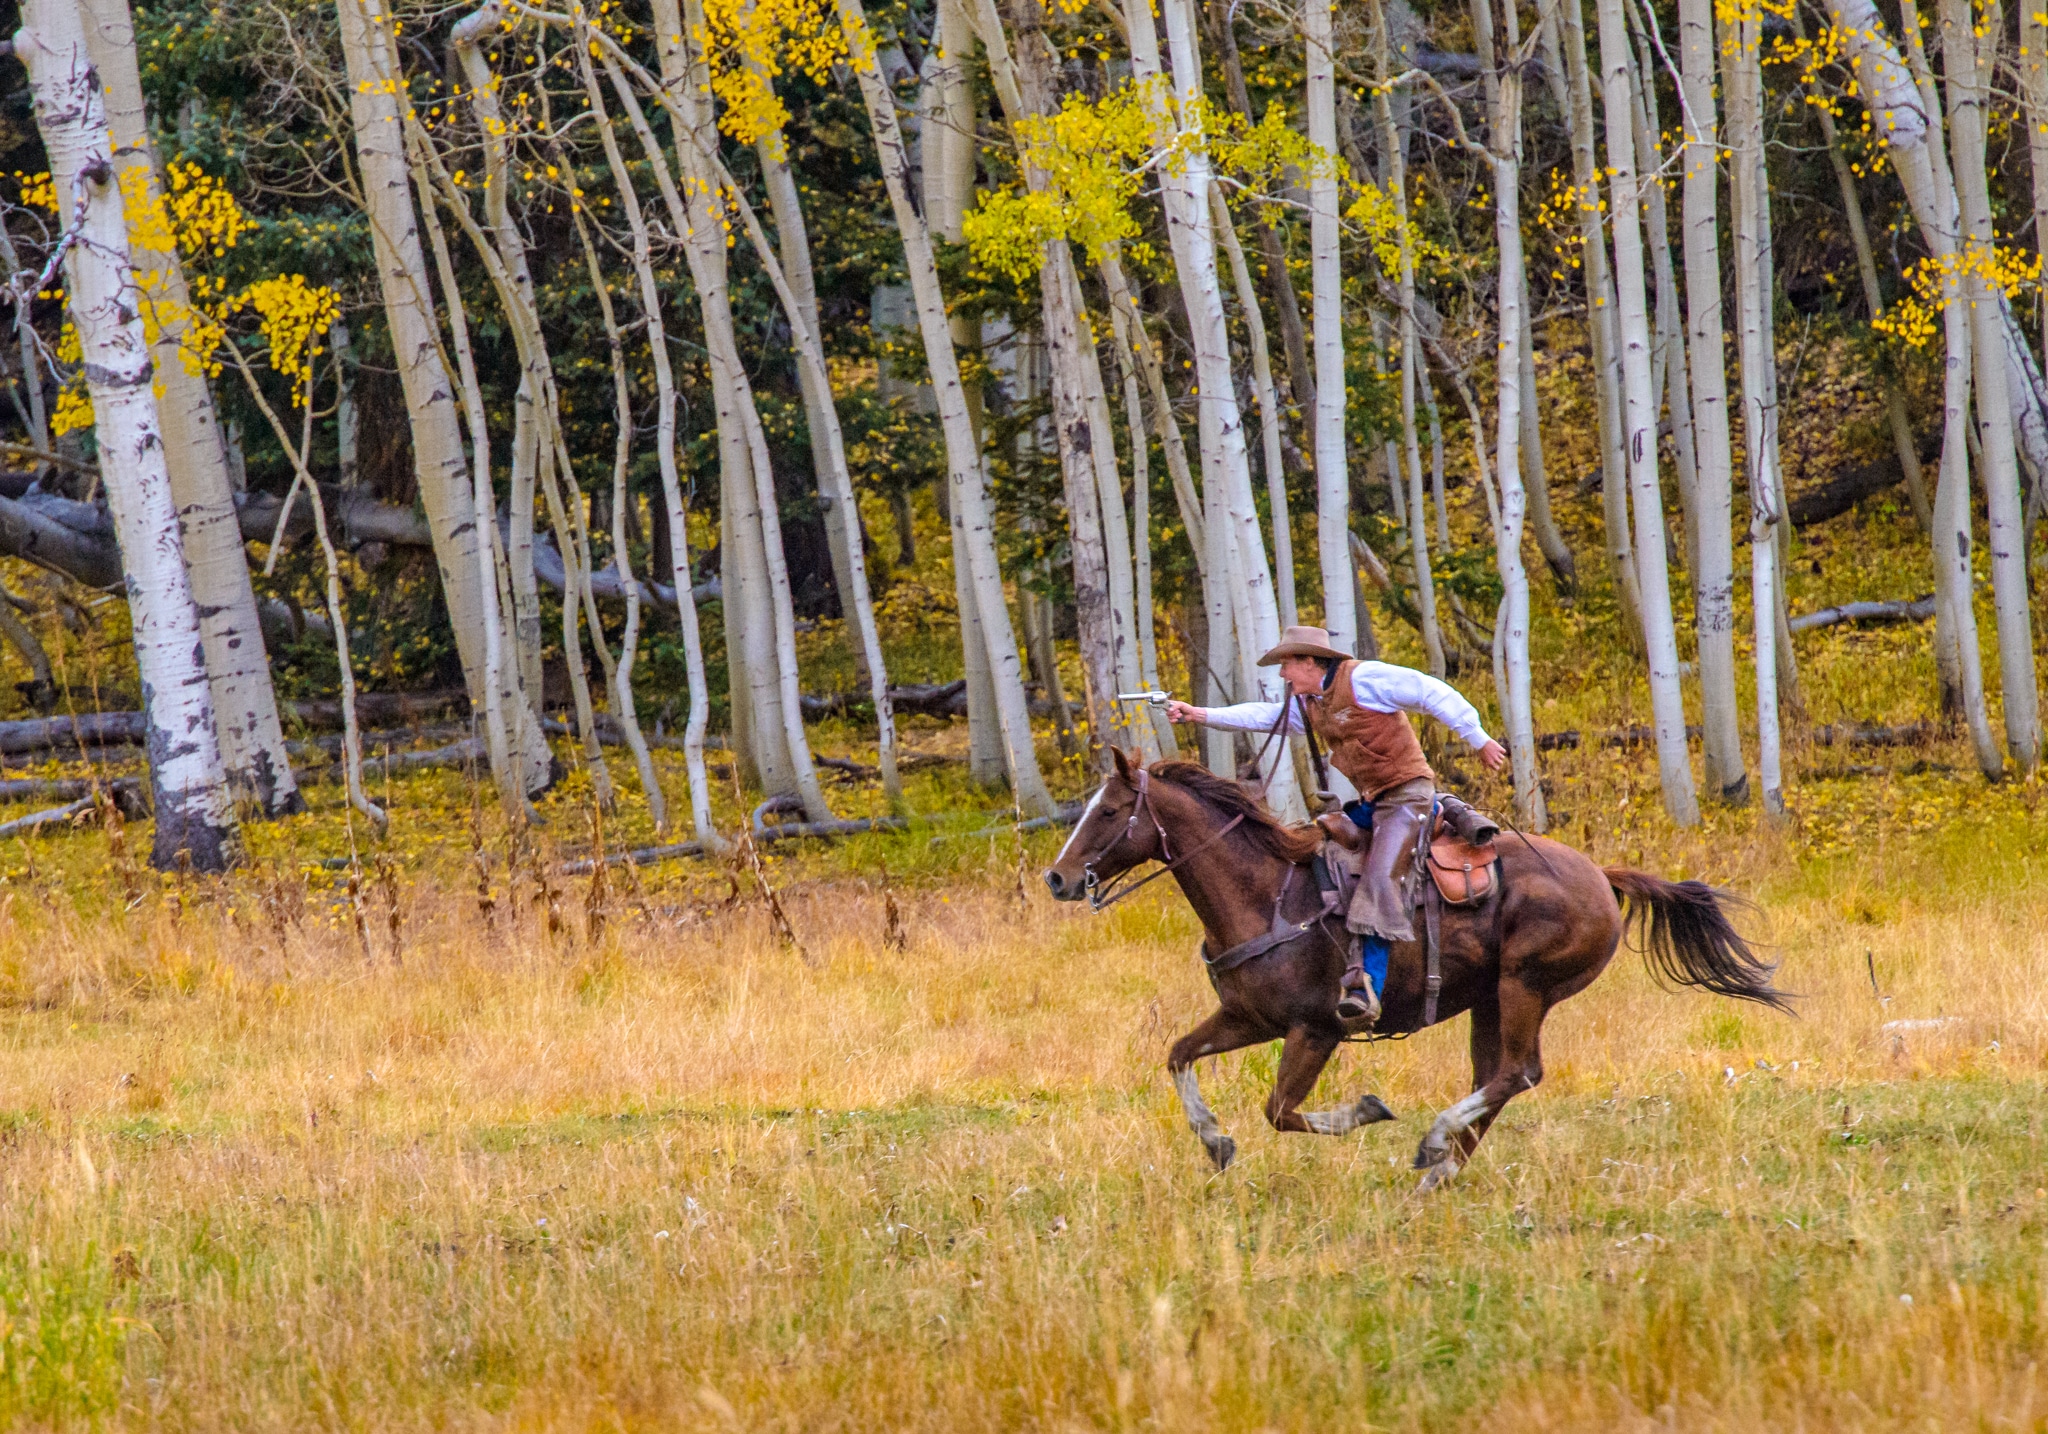 Here a reenacter is practicing for the famous scene from the Jon Wayne version of True Grit in Katie's Meadow along Owl Creek Pass Road between Ridgway and Cimarron, Colorado.